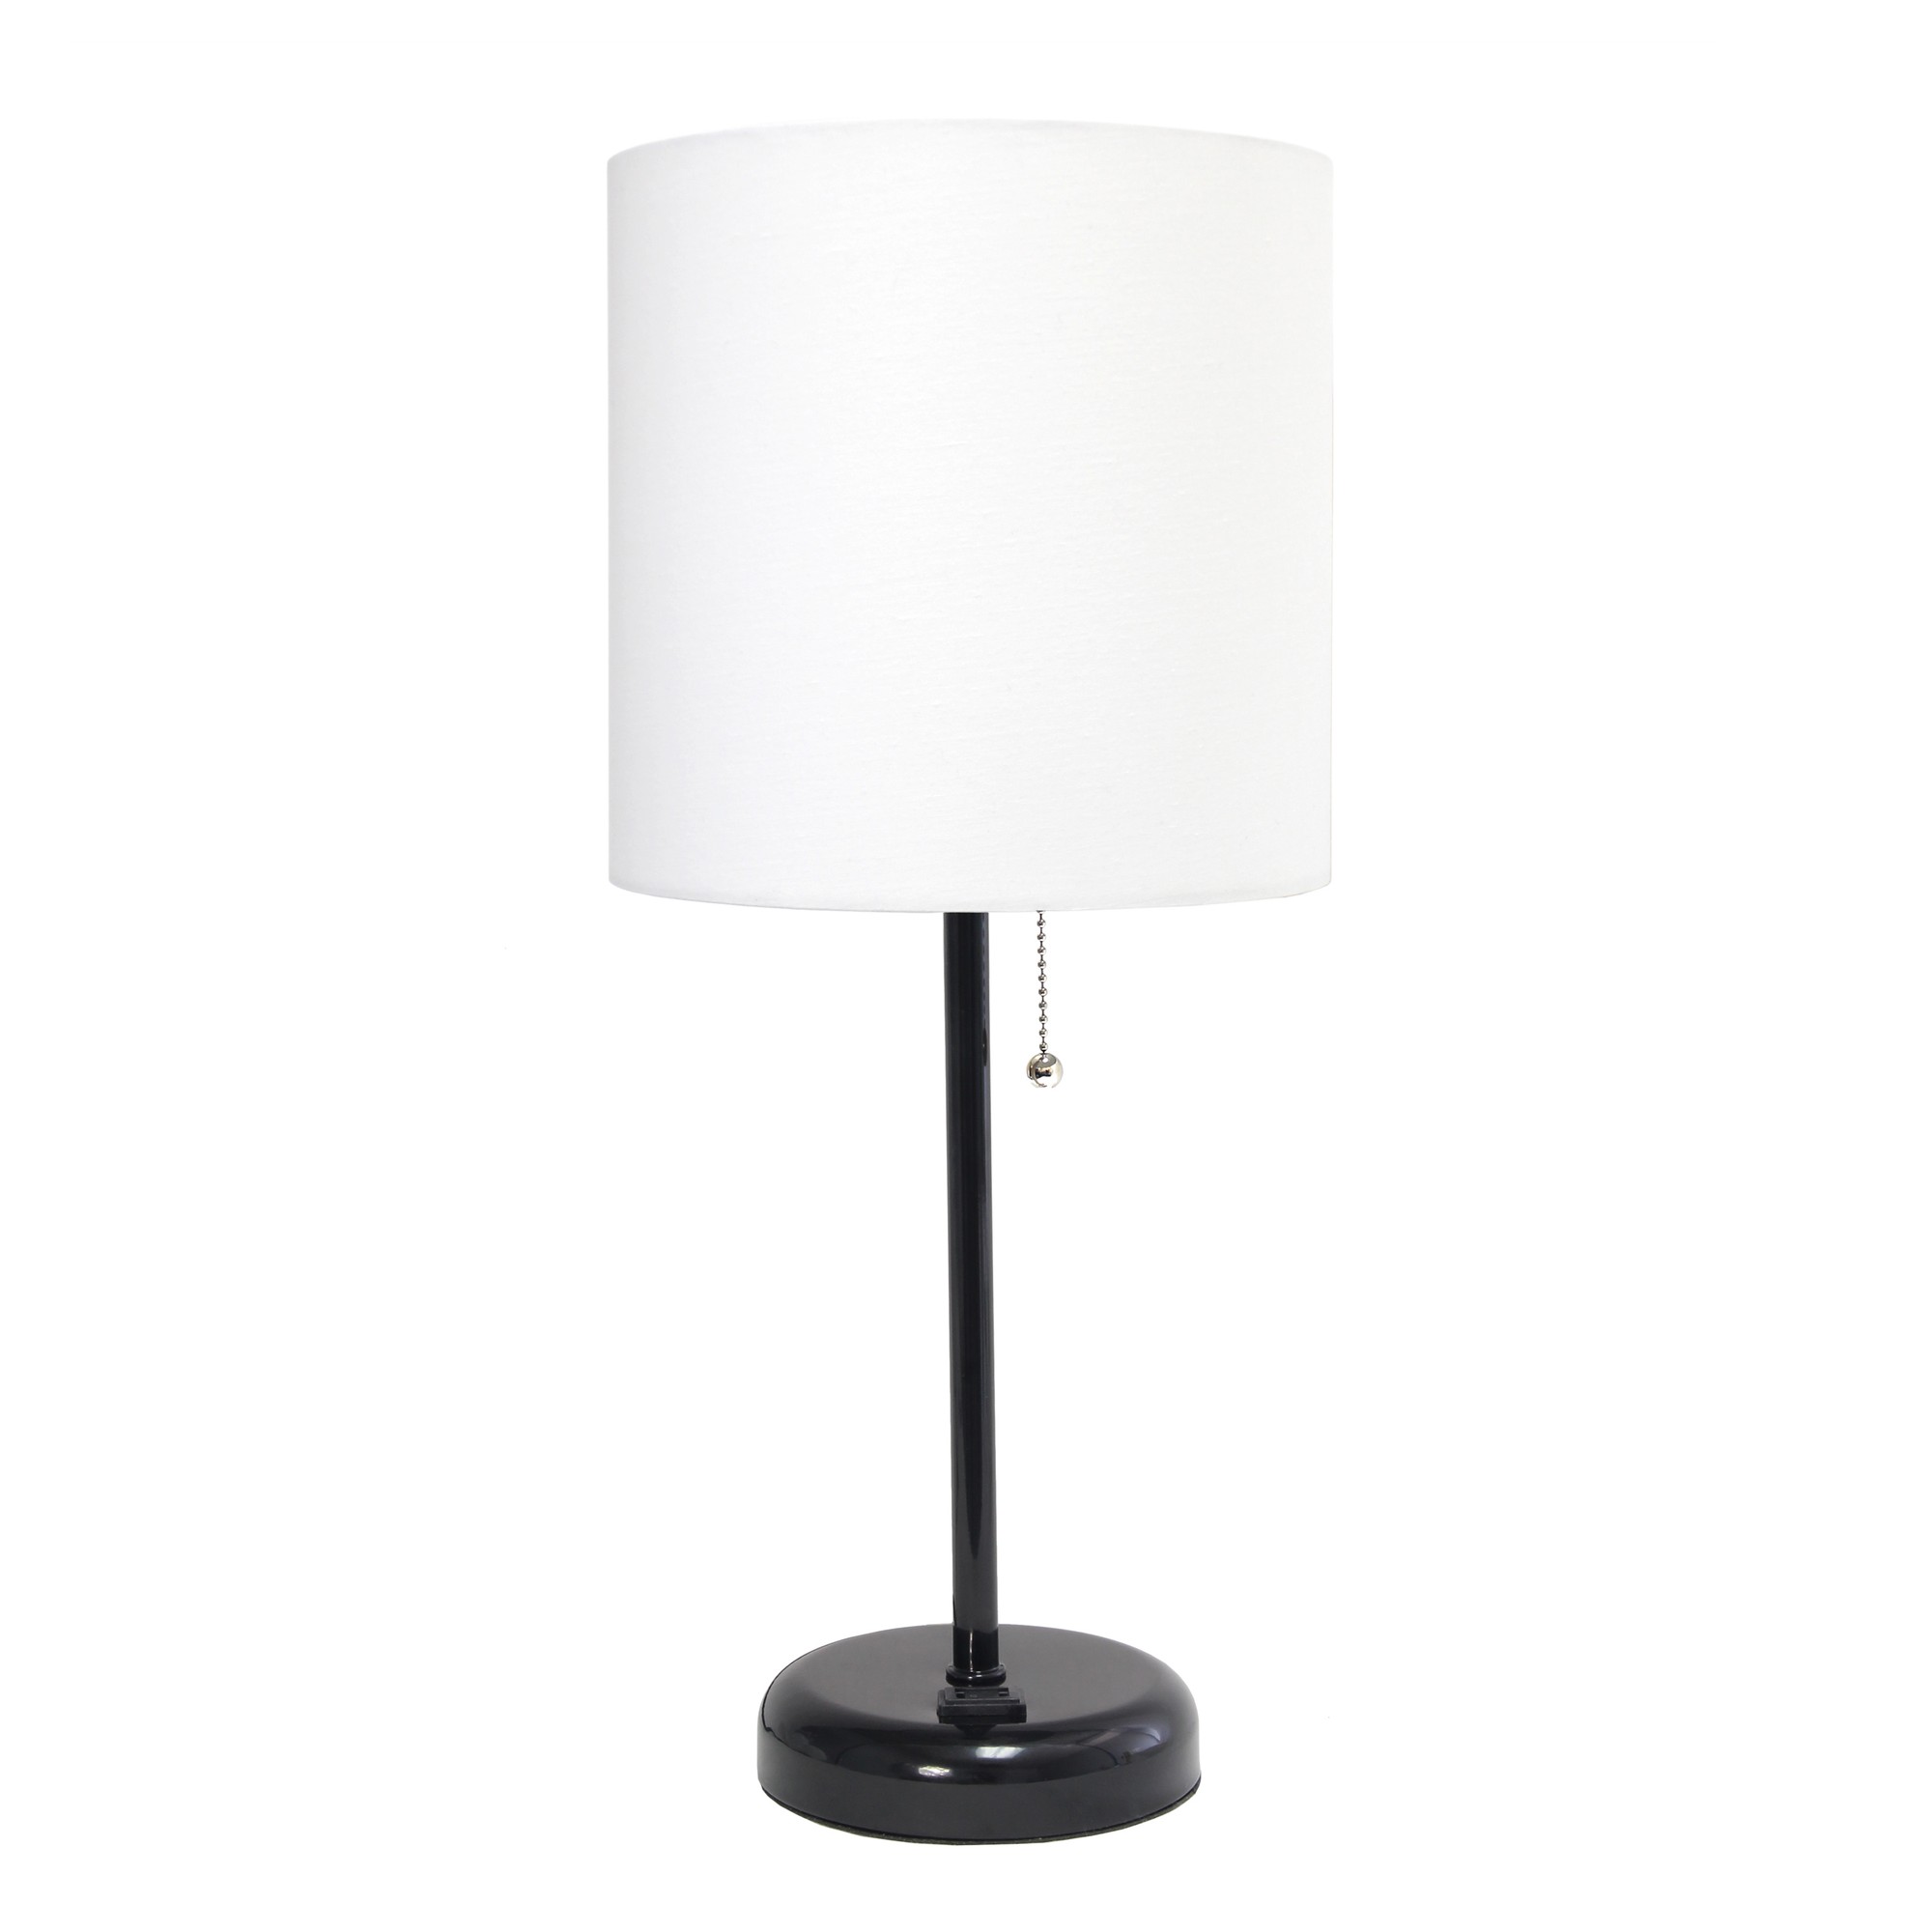 Simple Designs Black Stick Lamp with Charging Outlet and Fabric Shade, White